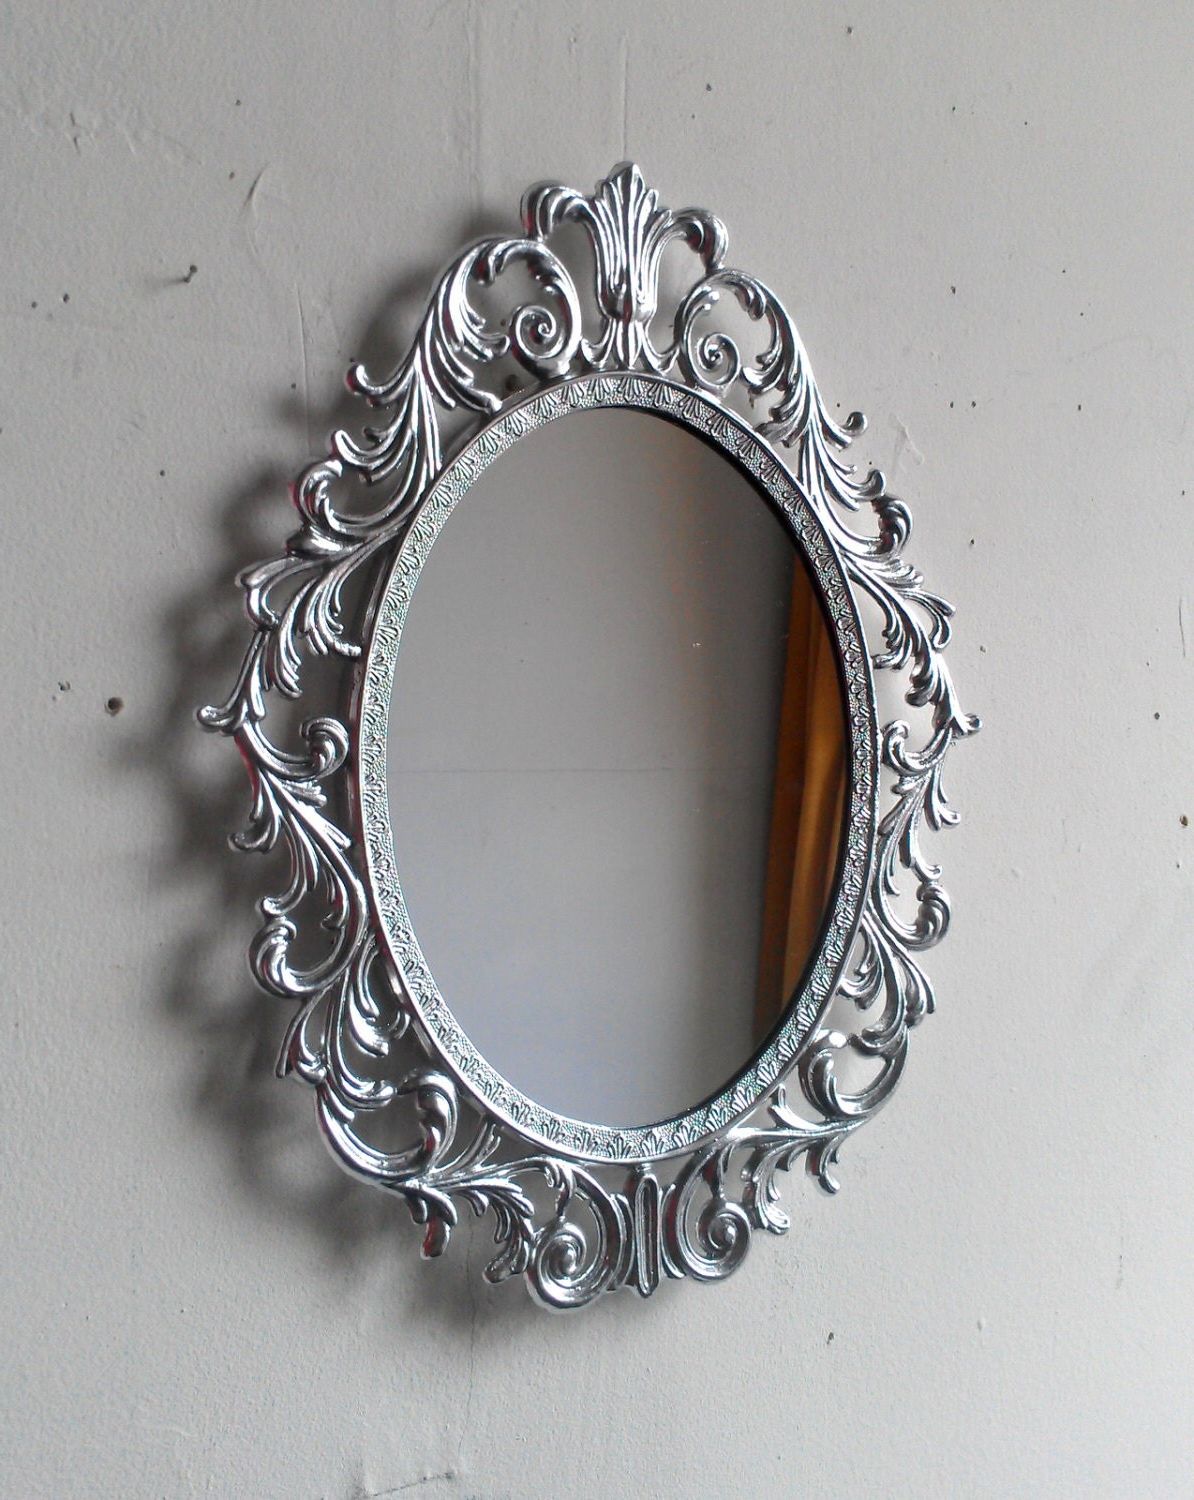 Metallic Silver Framed Wall Mirrors With Latest Silver Princess Mirror Ornate Metal Oval Filigree Frame  (View 13 of 15)